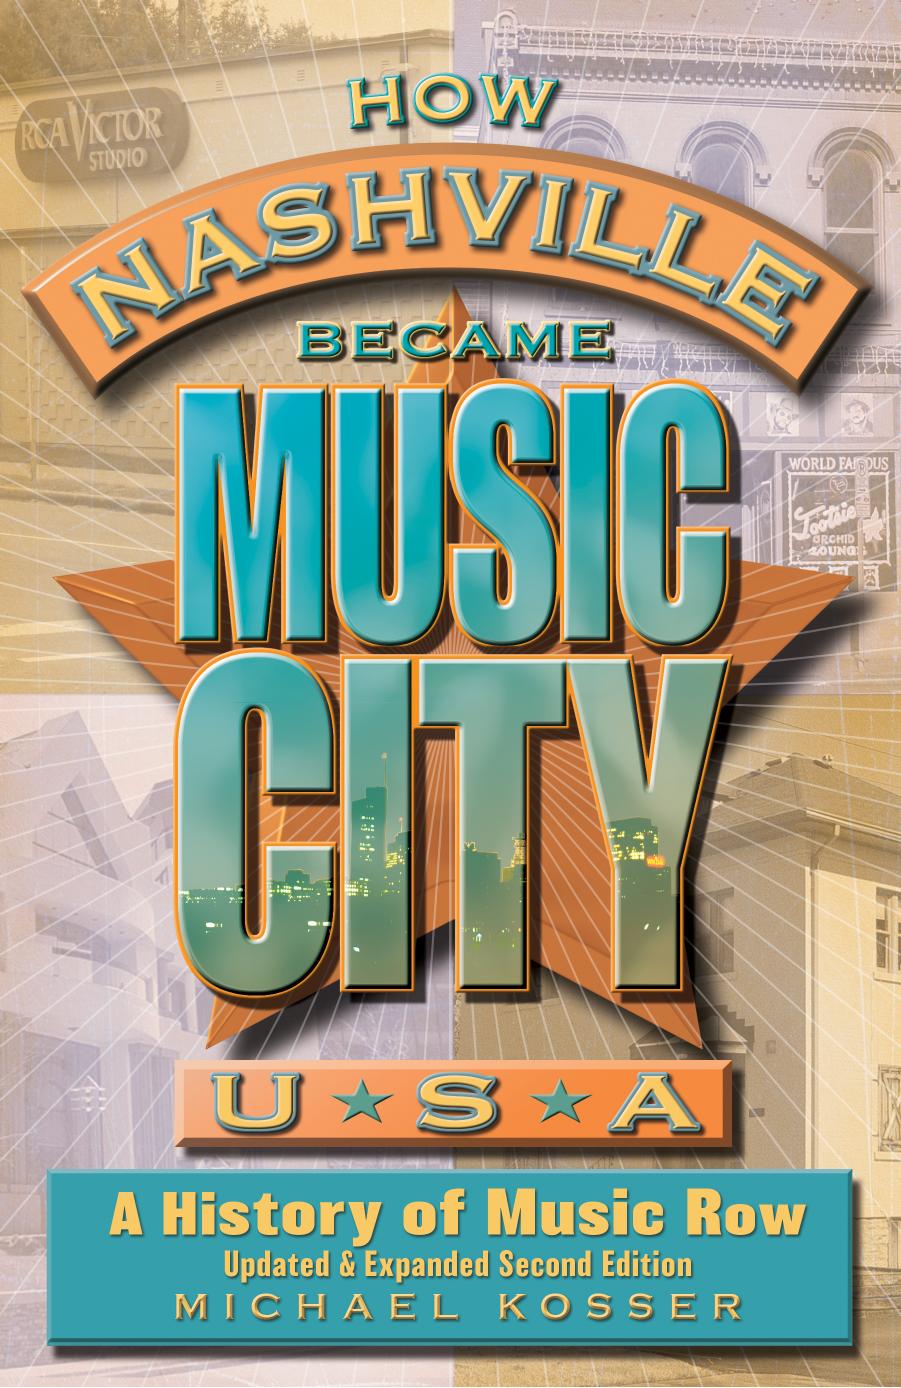 How Nashville Became Music City, U.S.A.: A History of Music Row, Updated and Expanded by Michael Kosser